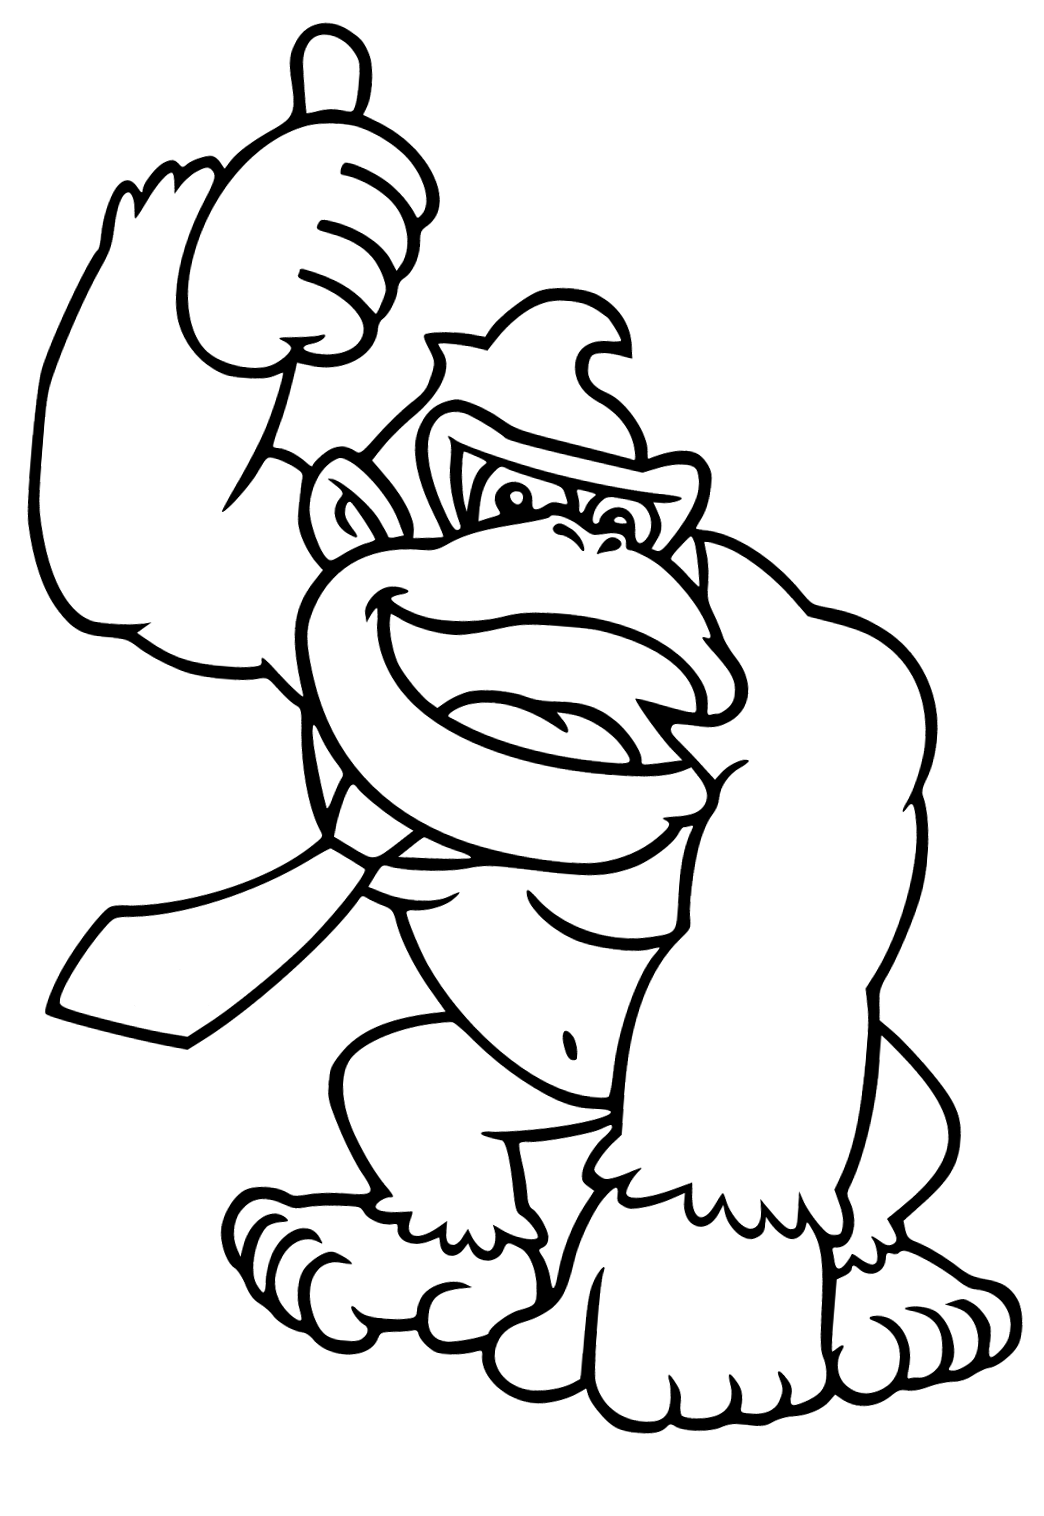 Free printable donkey kong great coloring page for adults and kids